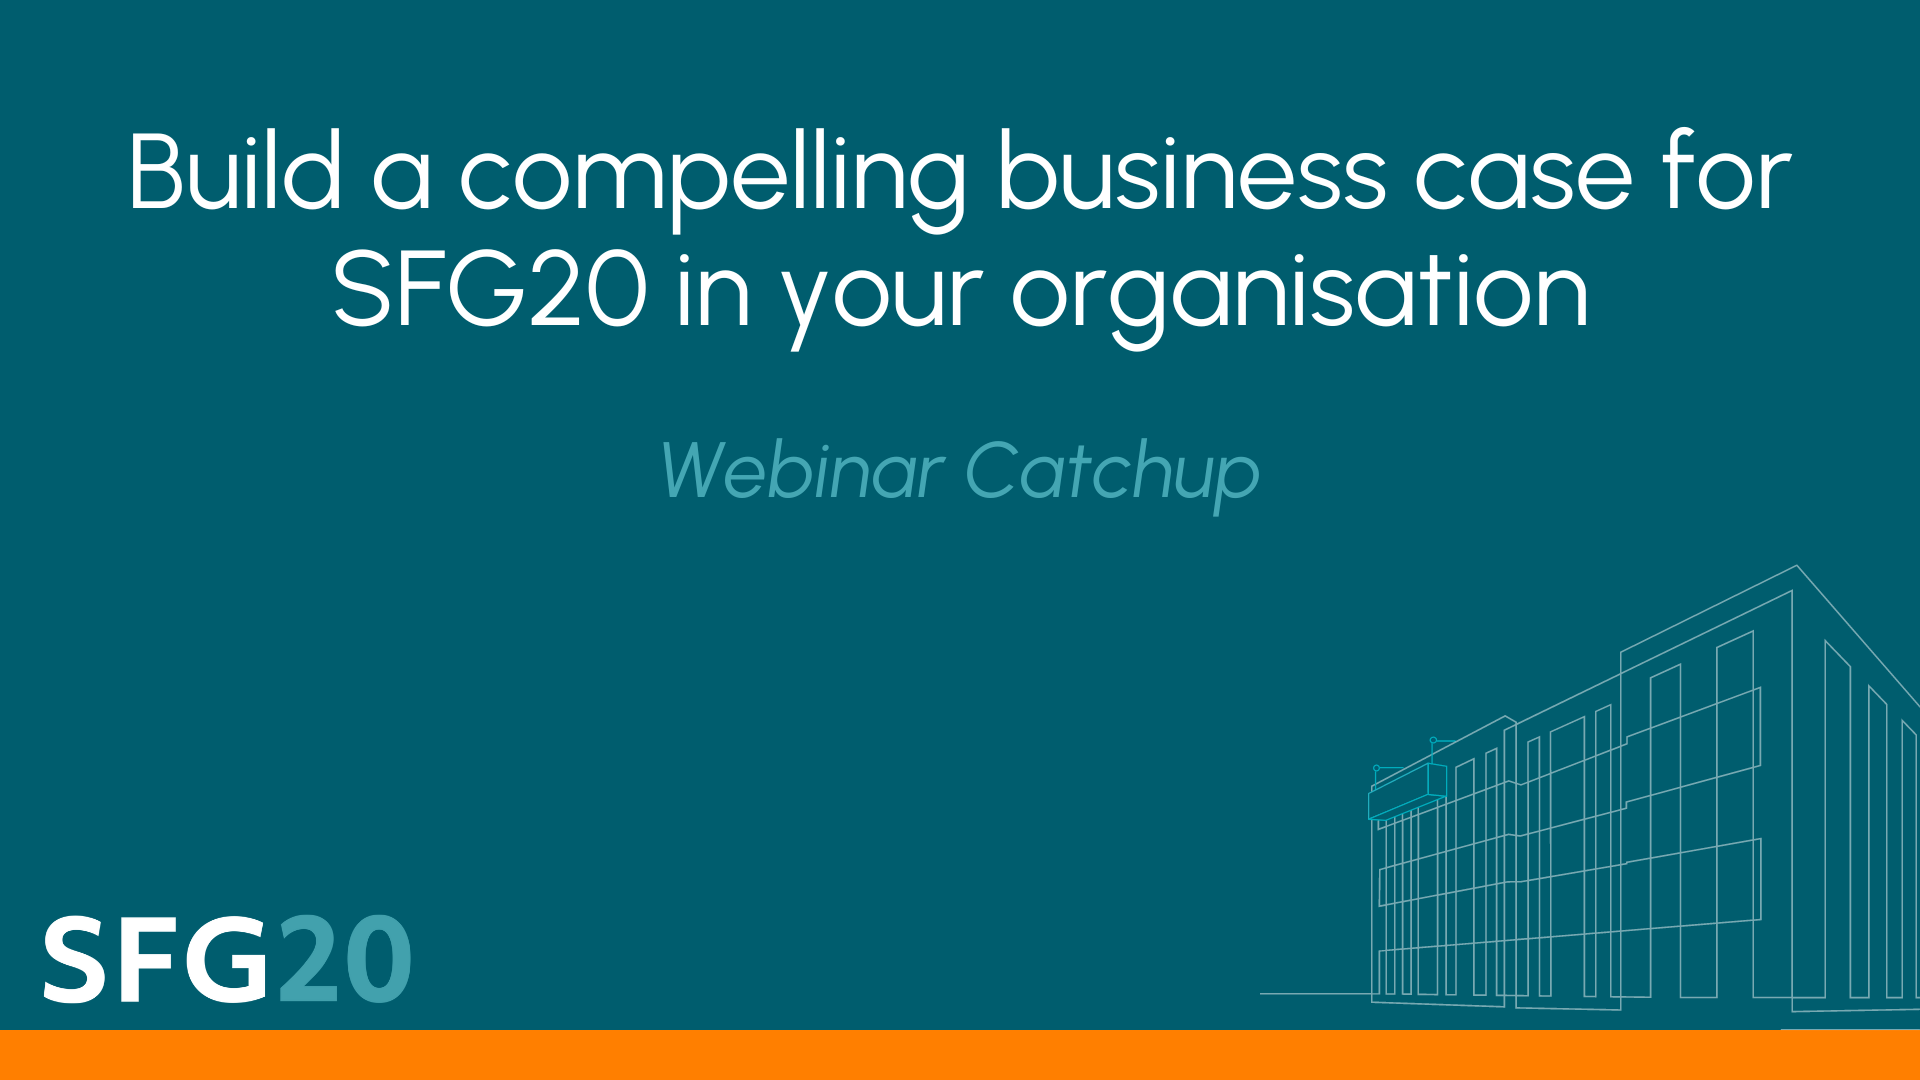 Build a compelling business case for SFG20 in your organisation